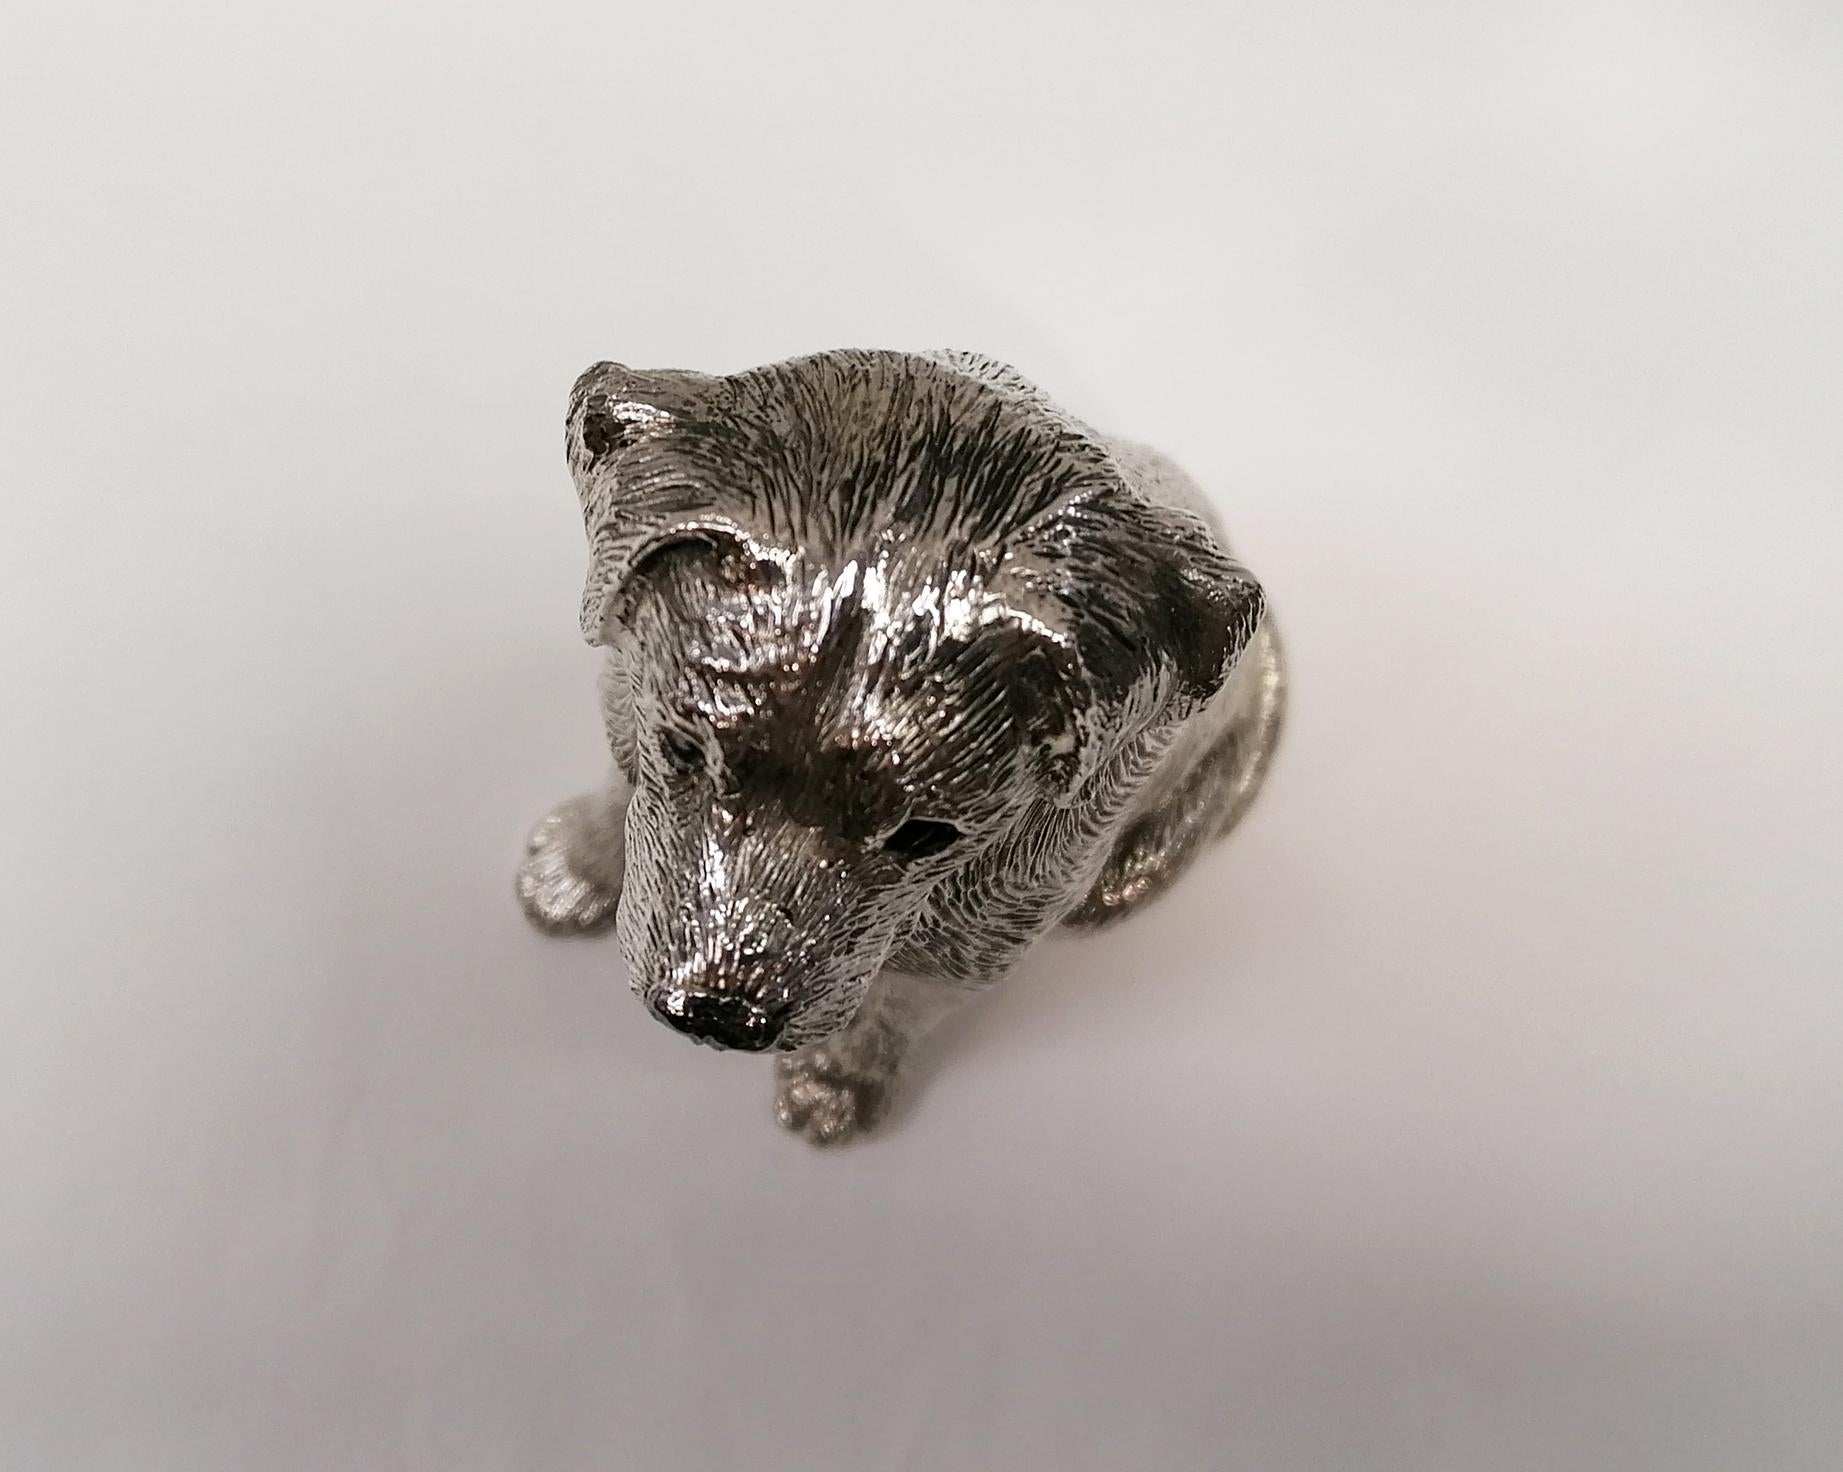 Italian 20th century sterling silver dog.
Sculpture depicting the Labrador retriever dog.
Made with the fusion system and finely hand-chiseled for the finish.
The details of the sculpture have been carefully highlighted by the hand of the